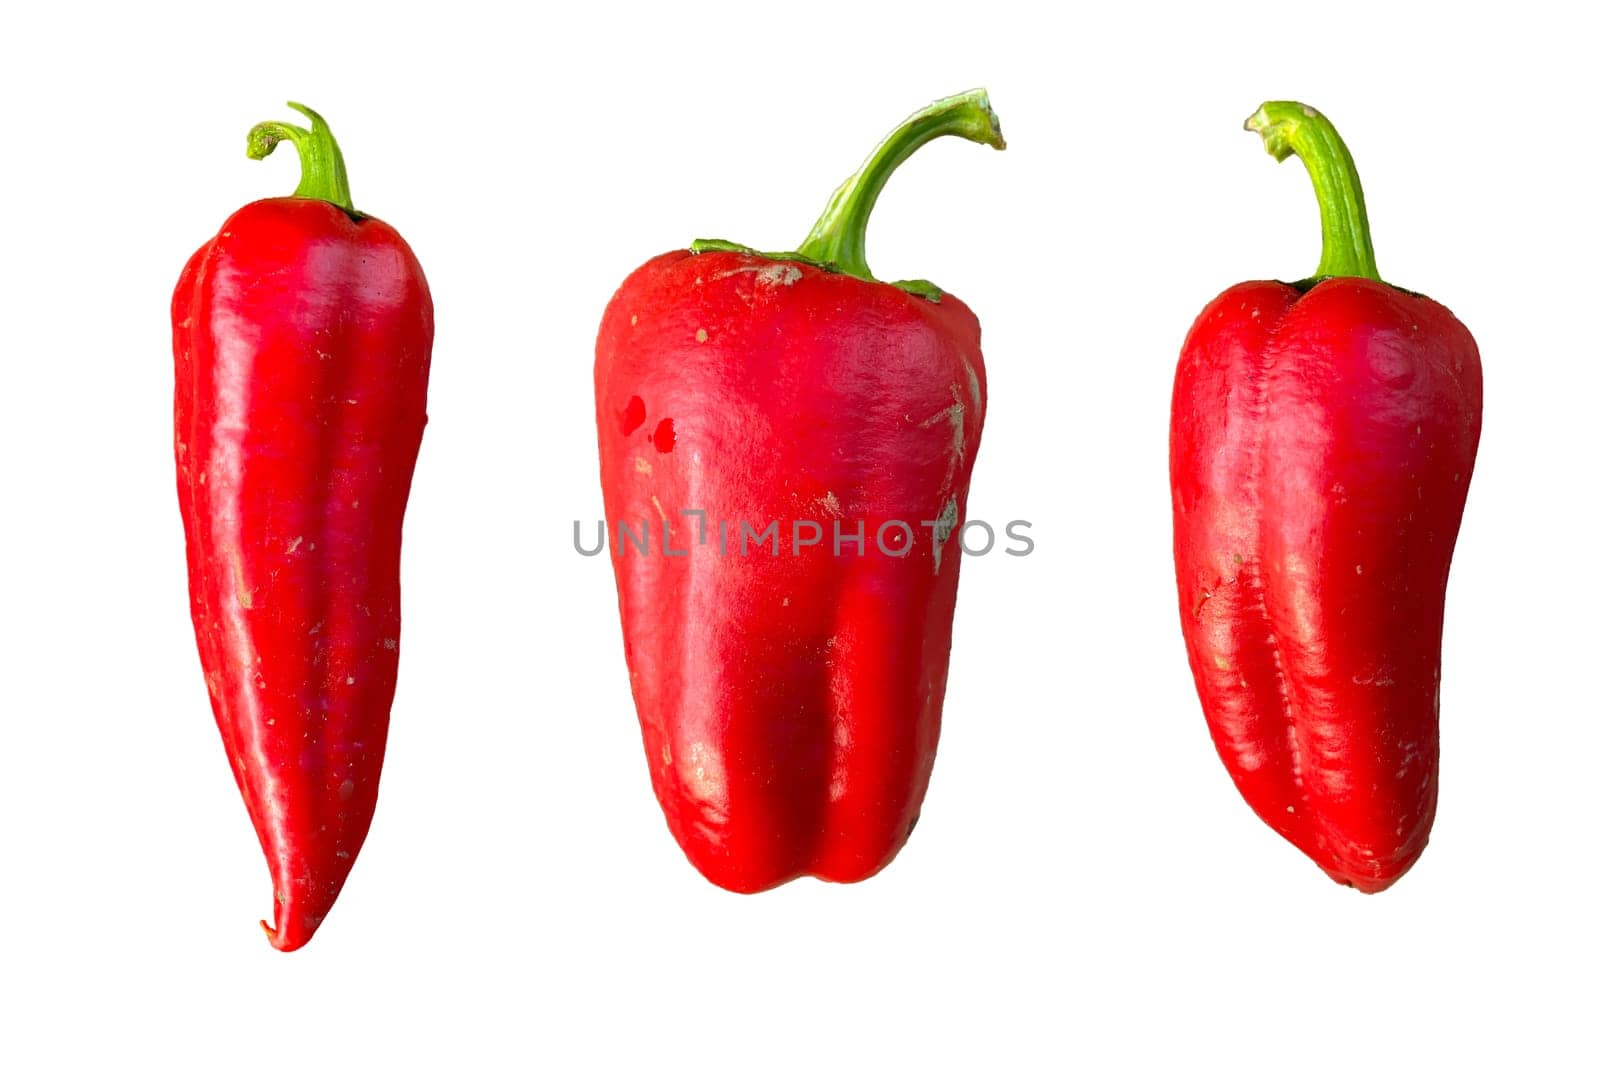 unwashed red peppers on a white background.